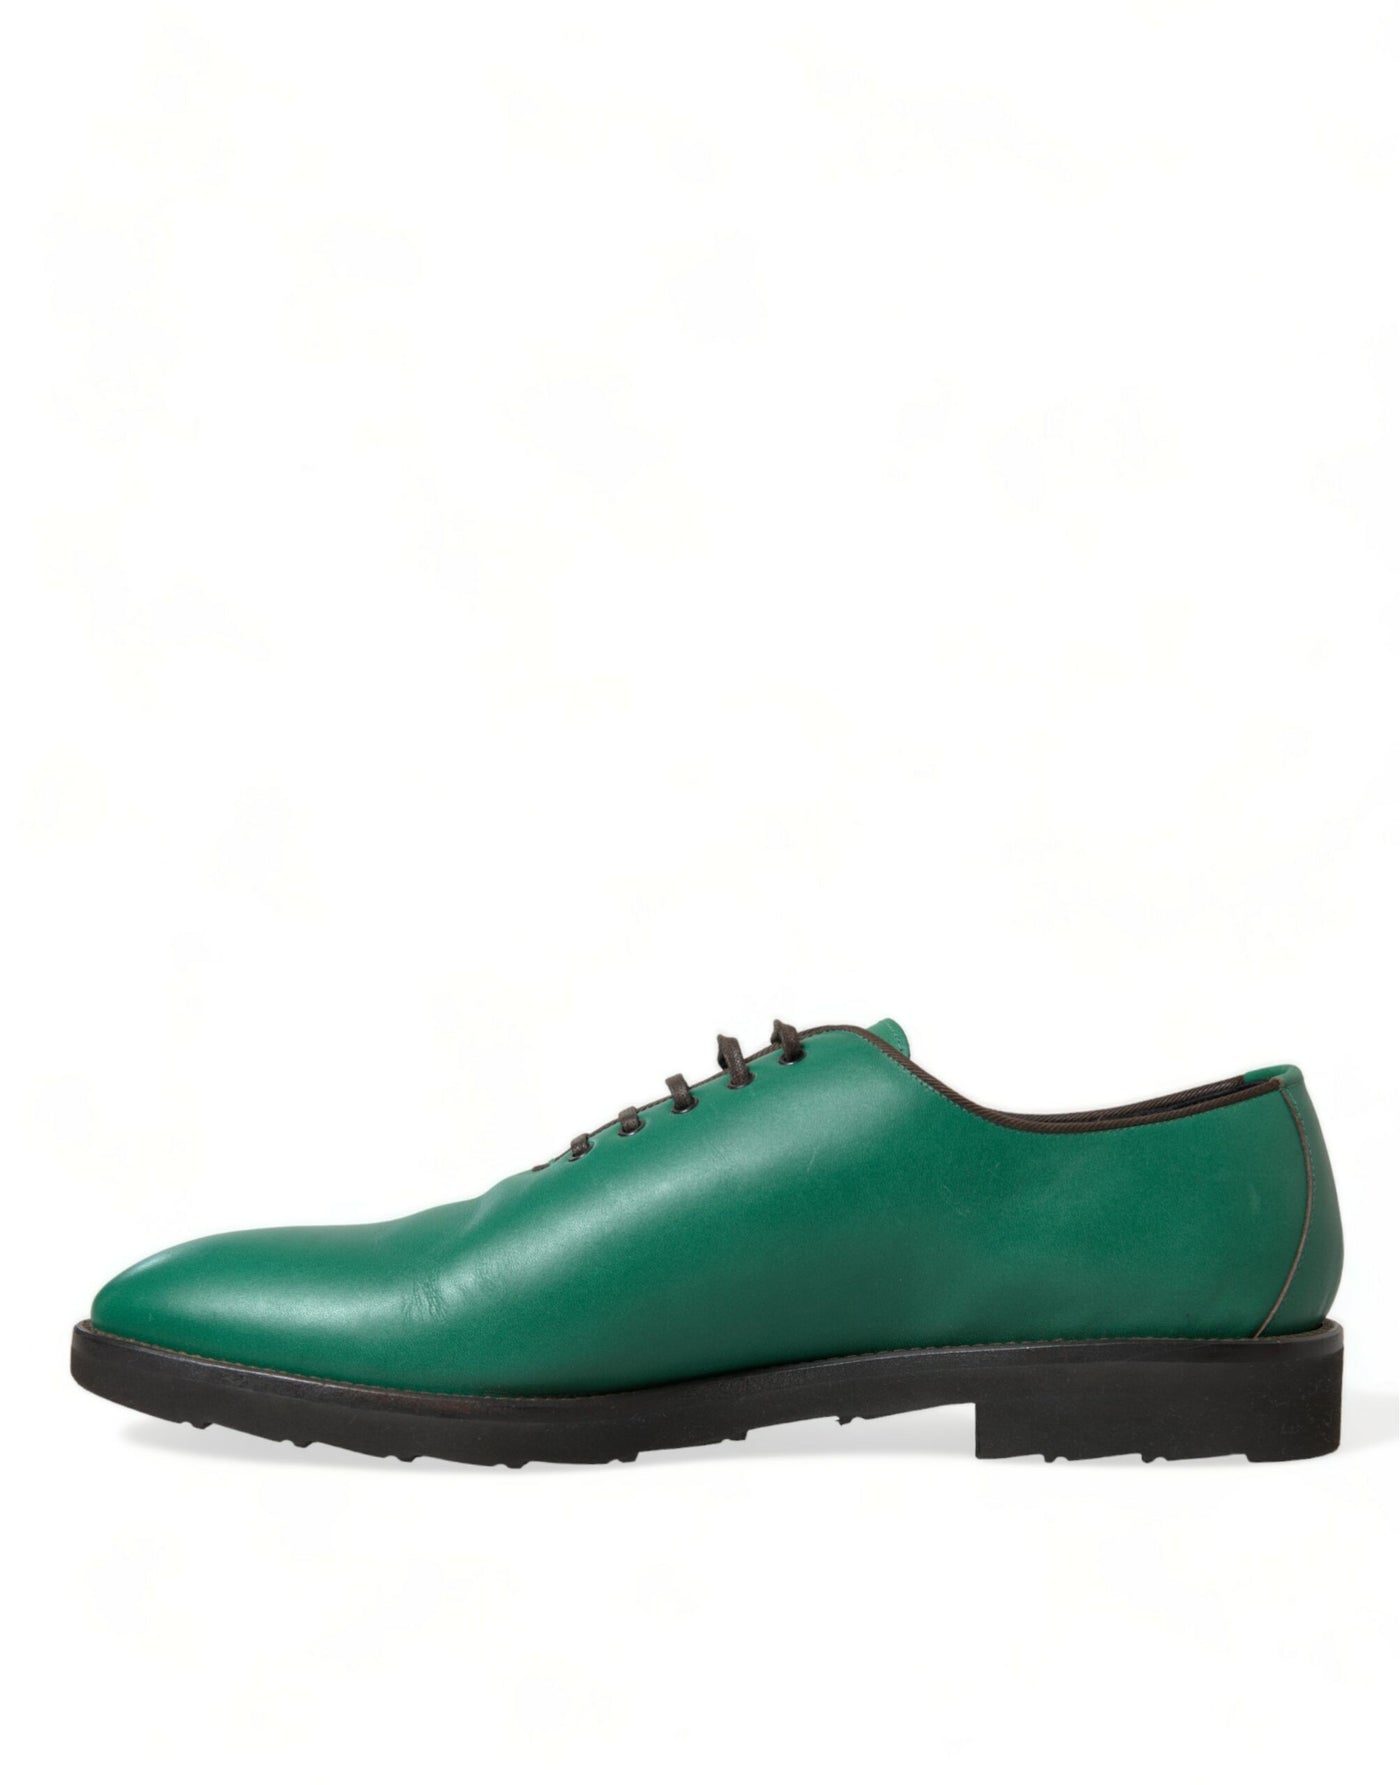 Dolce & Gabbana Green Leather Lace Up Oxford Dress Shoes